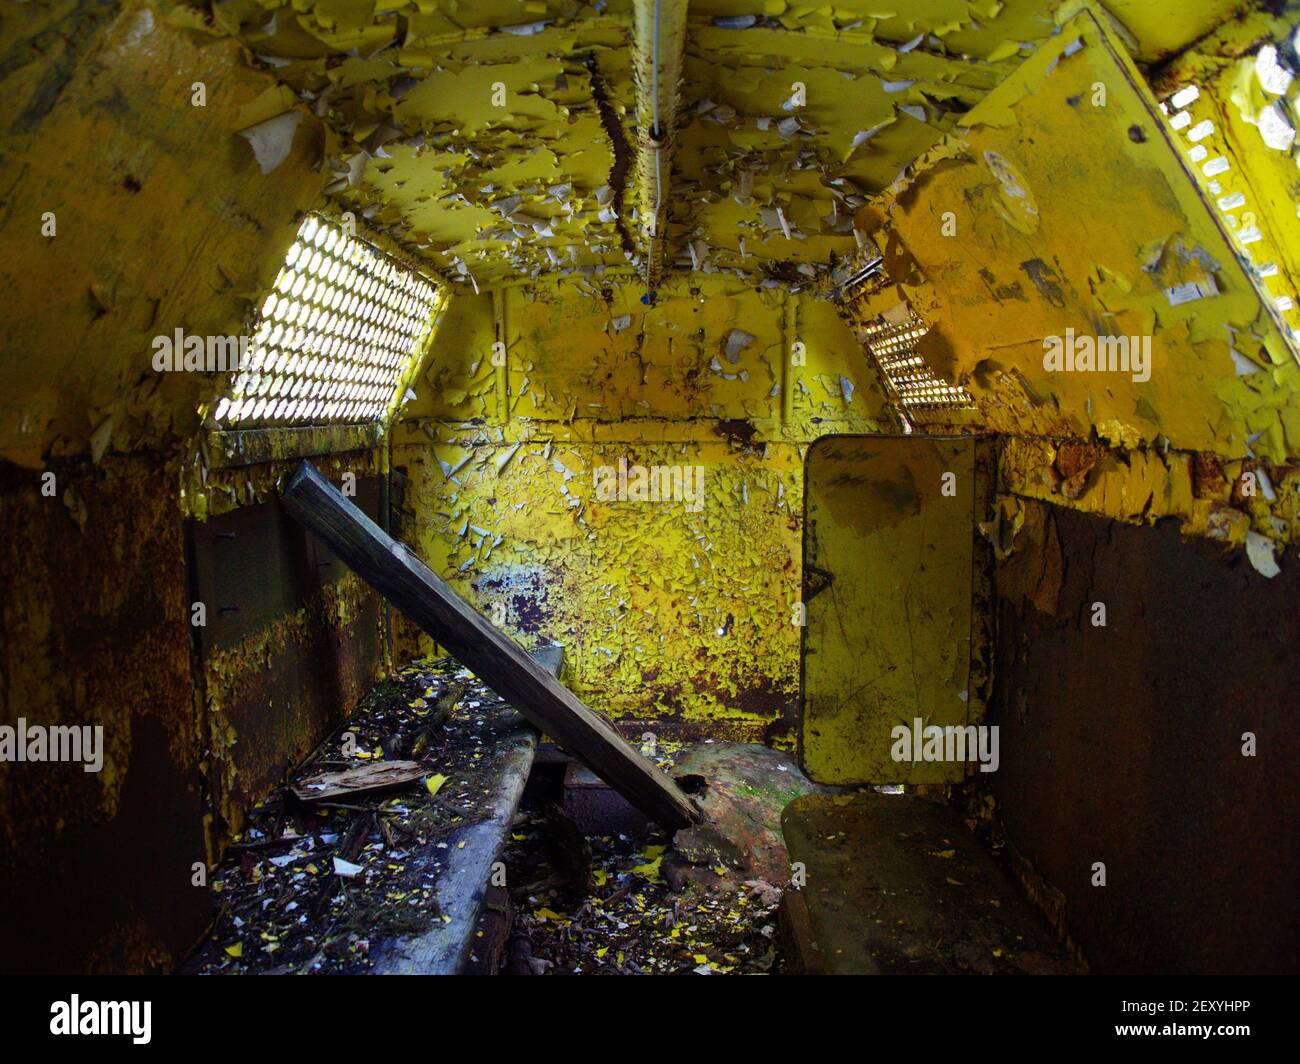 Inside an old mining lorry, black forest, Germany Stock Photo